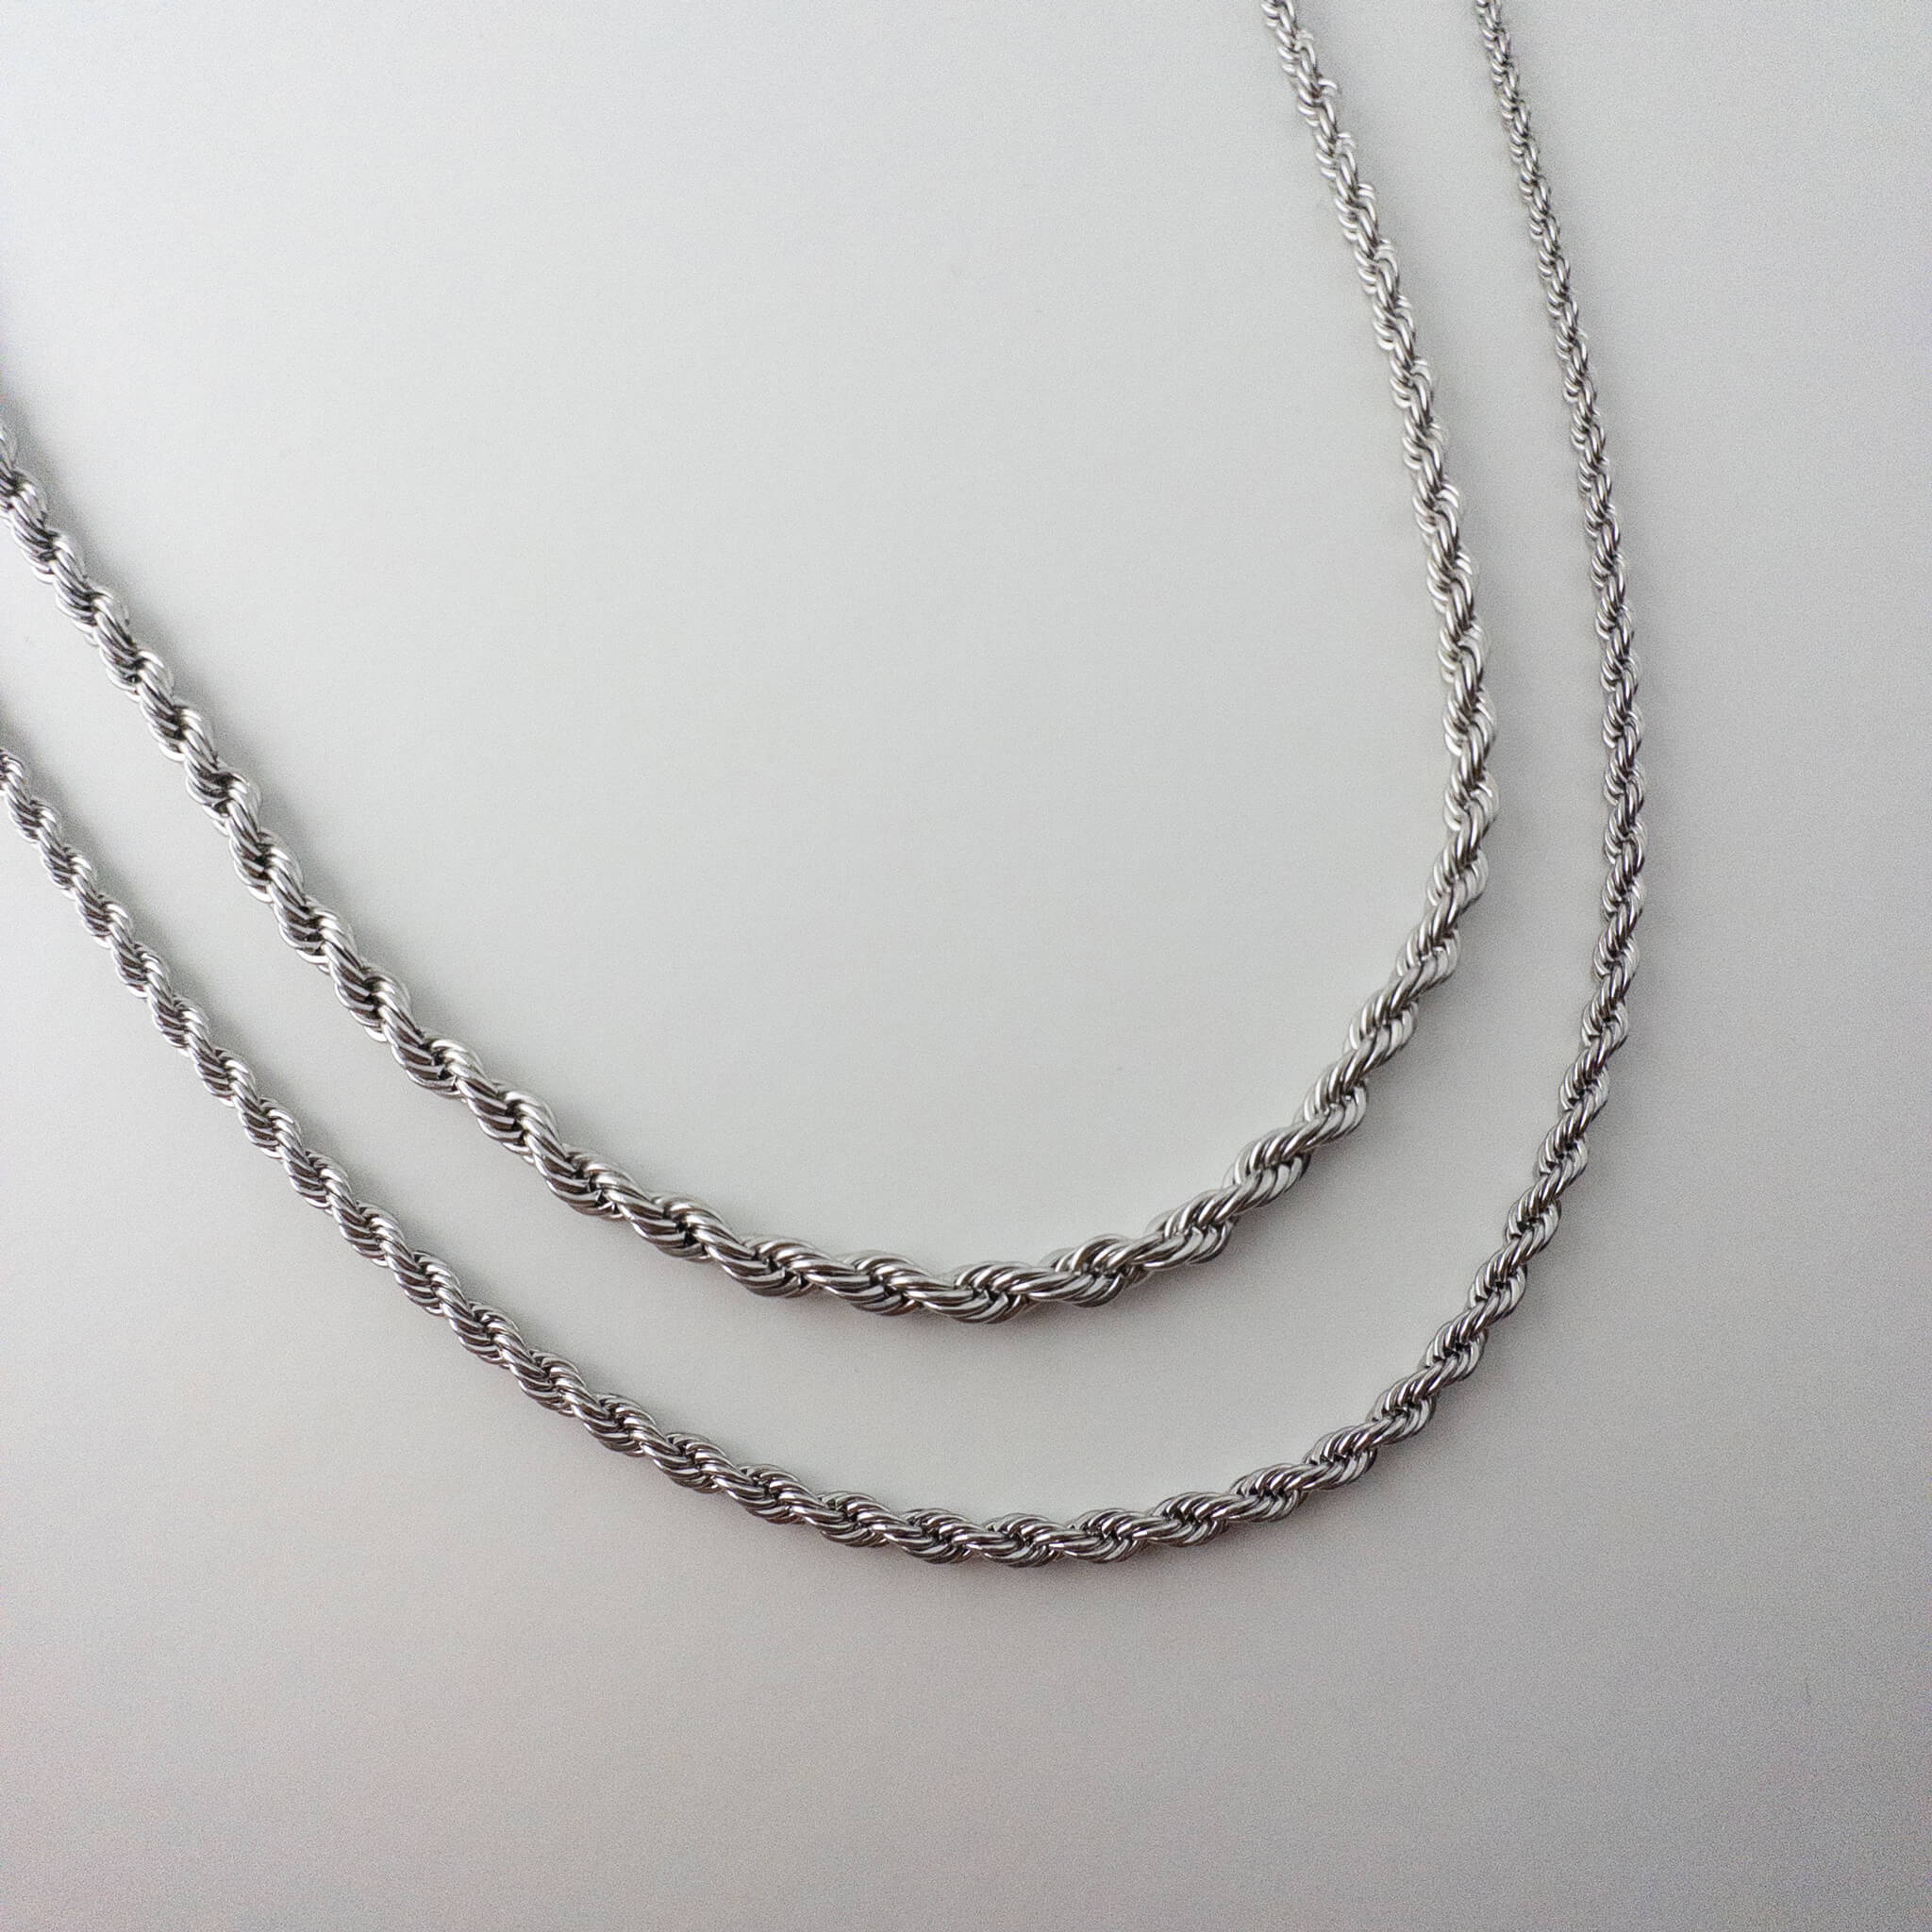 Rope ketting zilver